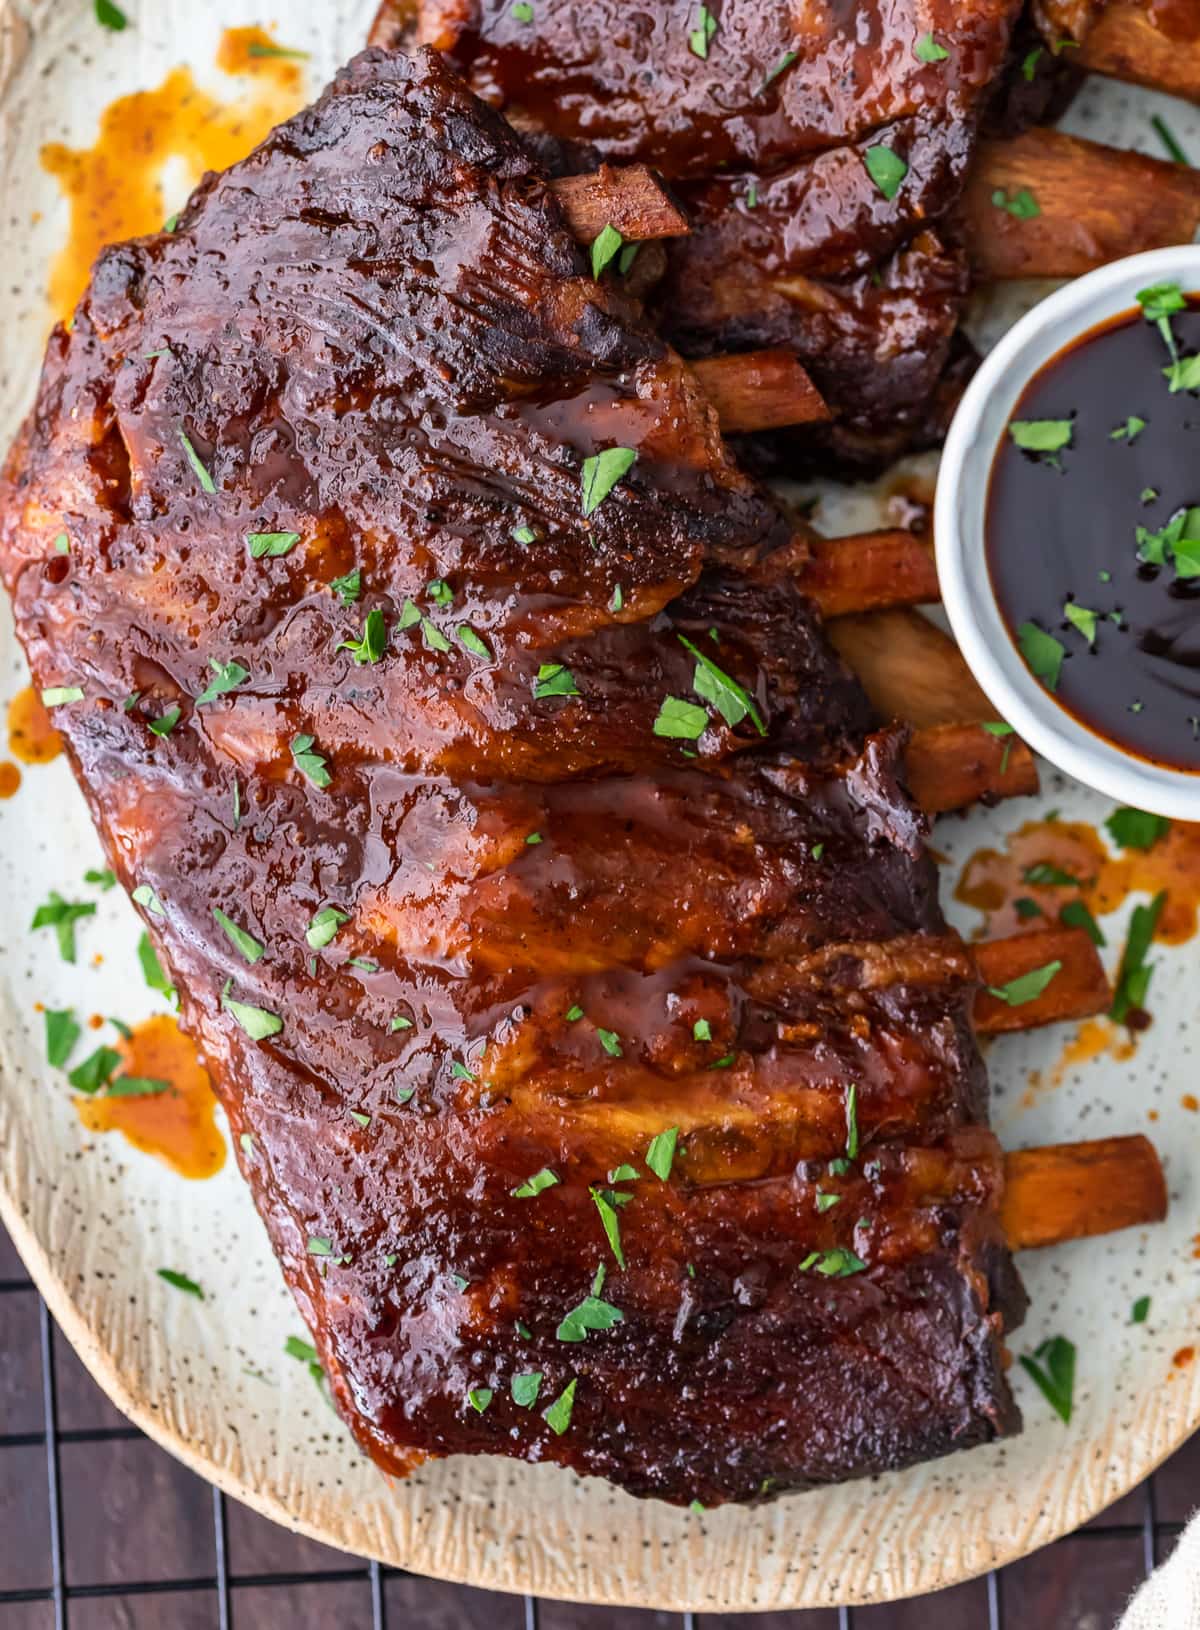 Crock Pot Ribs Slow Cooker Bbq Ribs Recipe How To Video,Rotisserie Oven